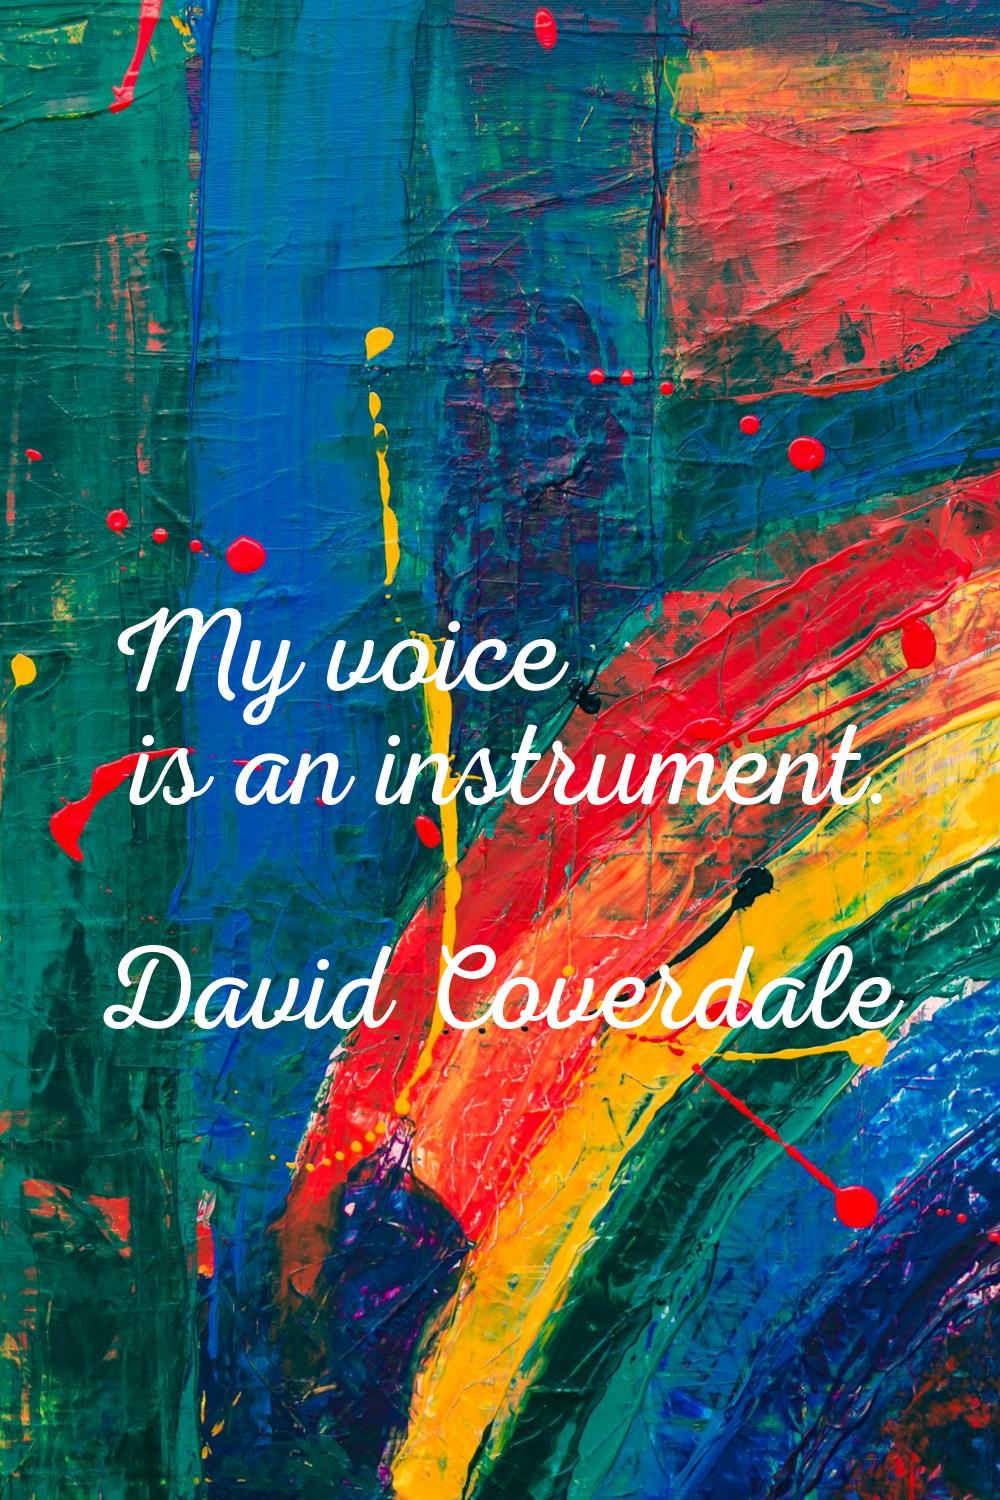 My voice is an instrument.